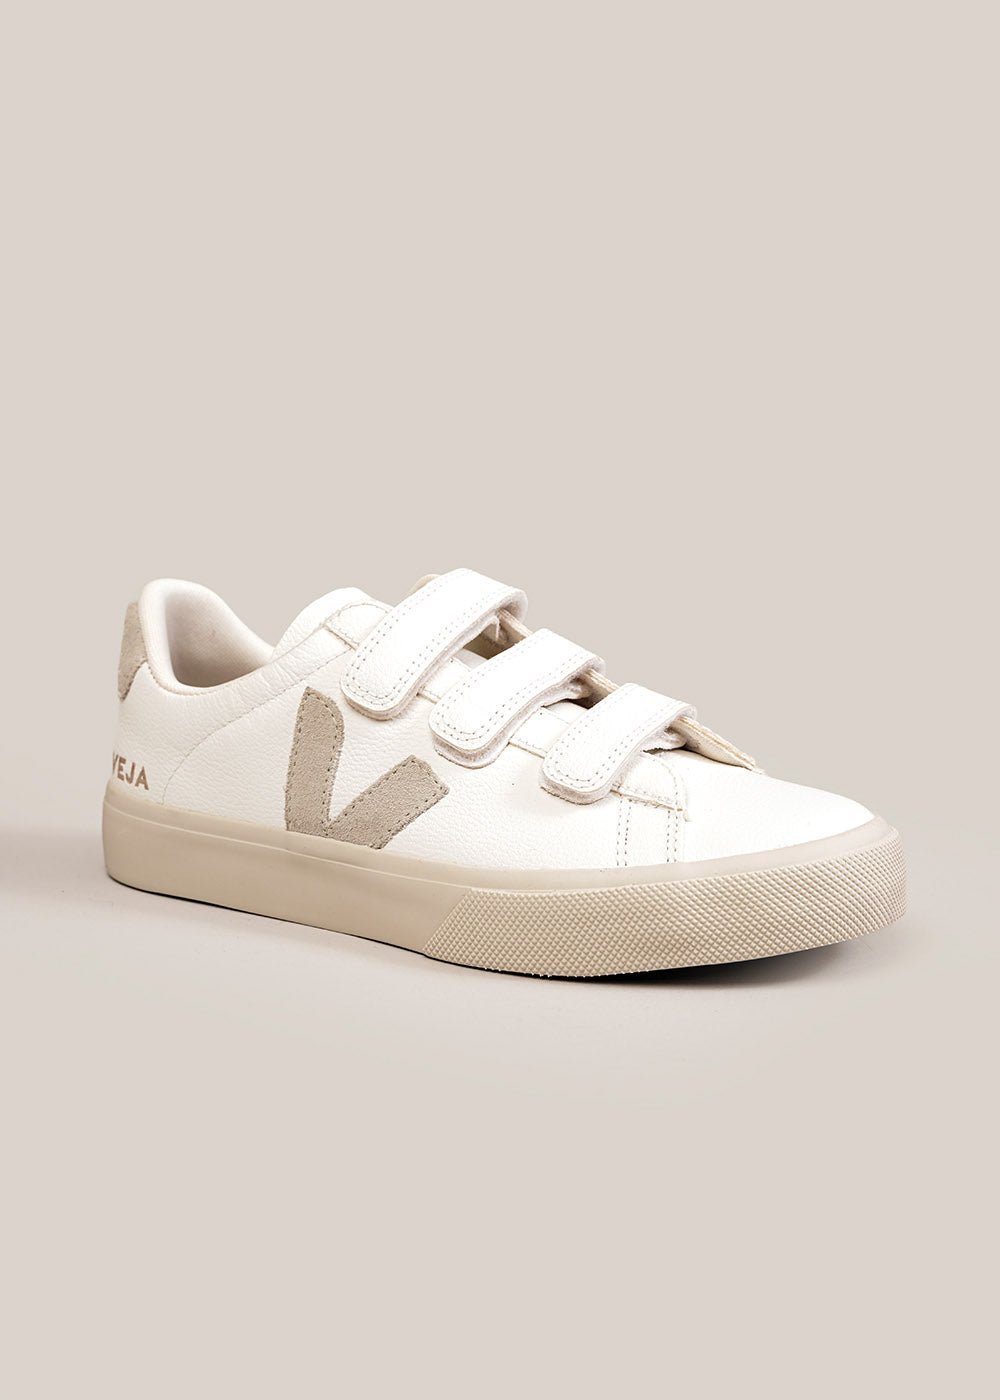 Veja Extra White Natural Recife Sneakers - New Classics Studios Sustainable Ethical Fashion Canada